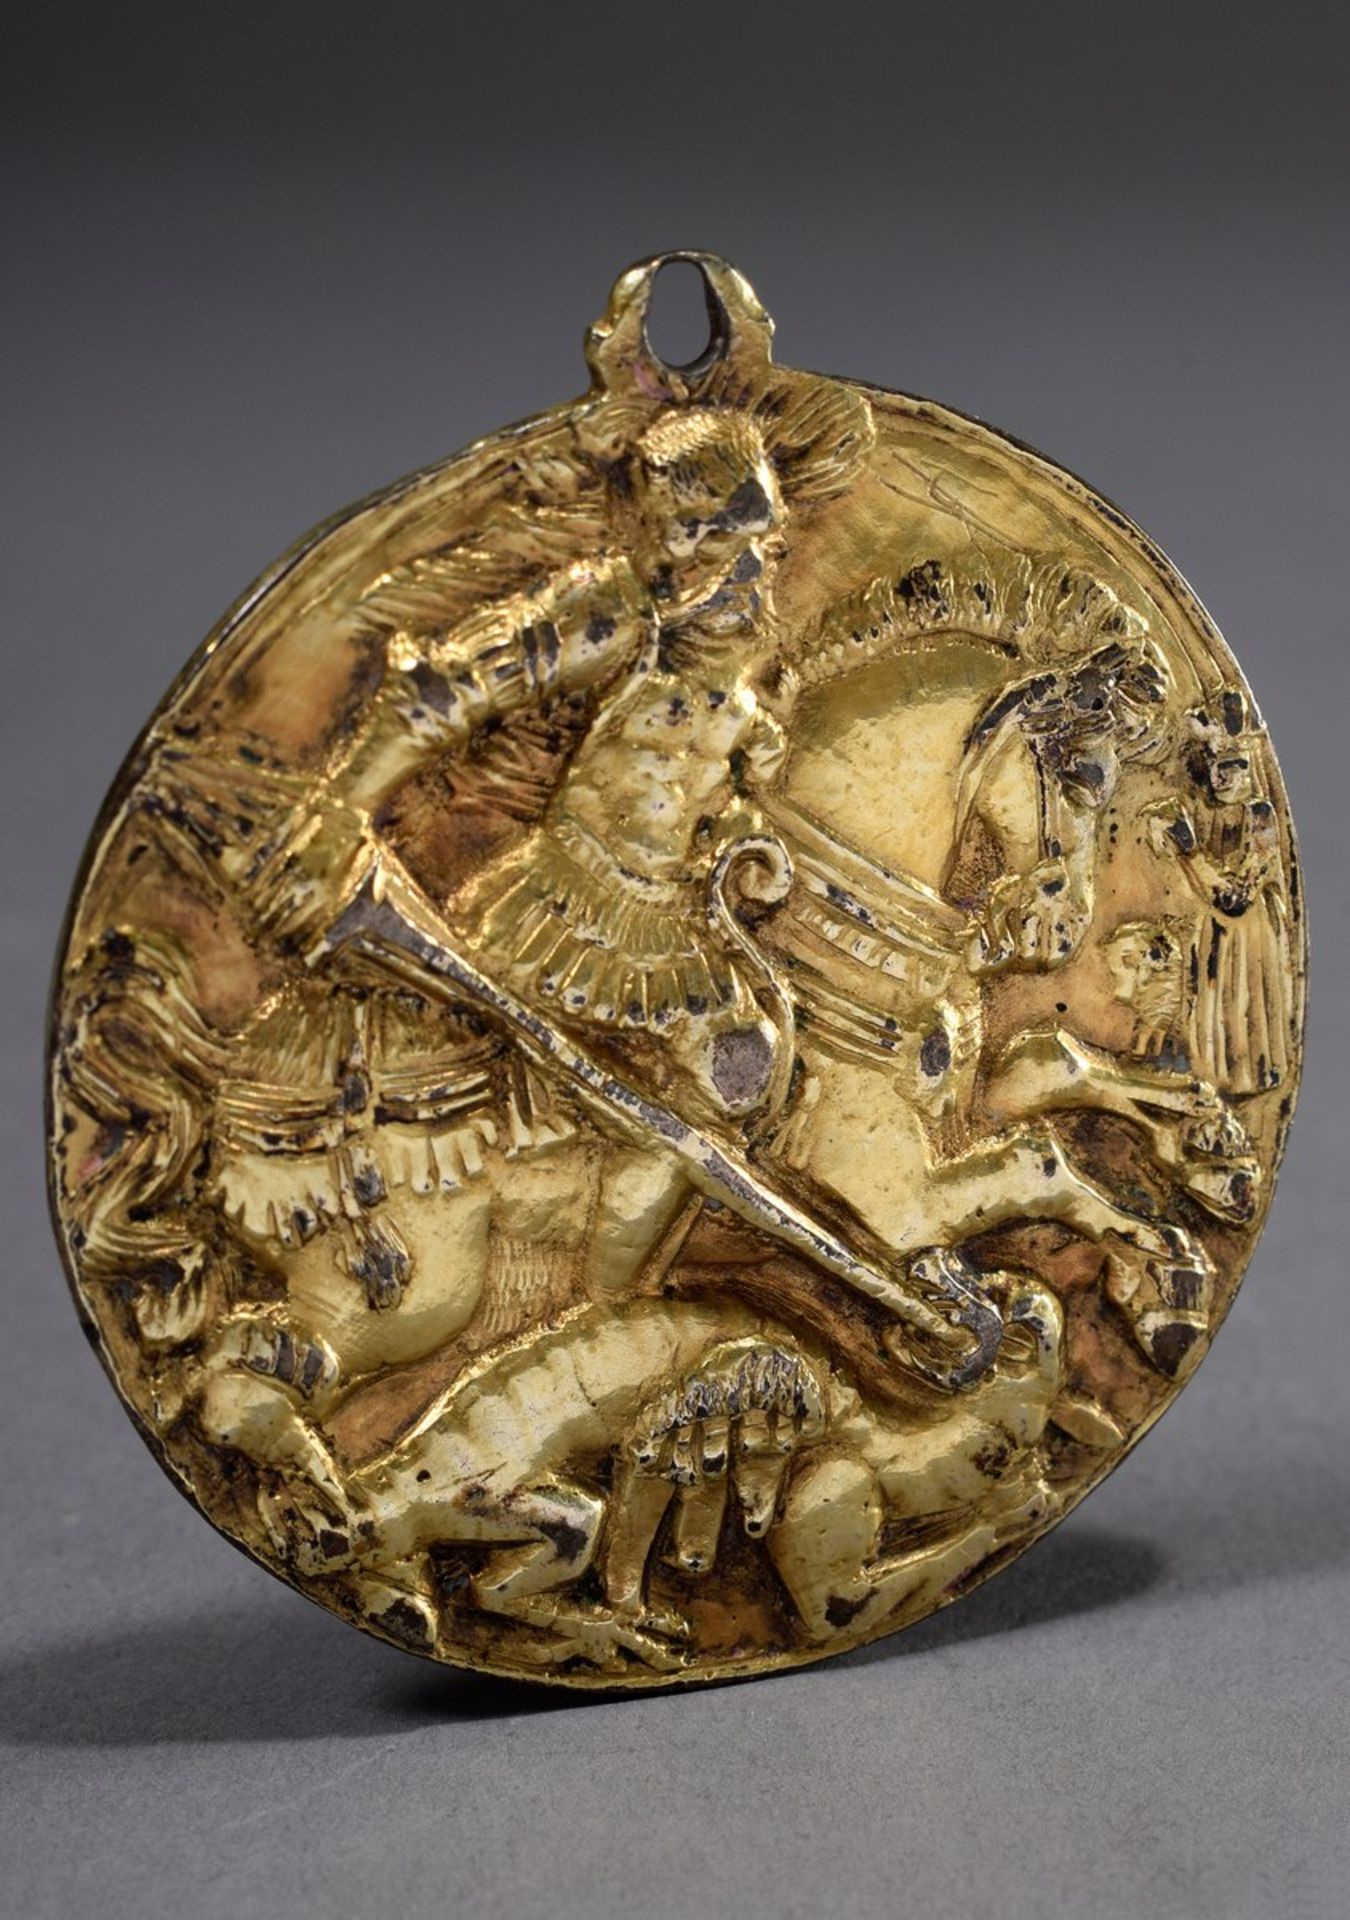 Double-sided amulet with relief "Saint George" and "Mother of God", bronze fire-gilt, mid 16th cent